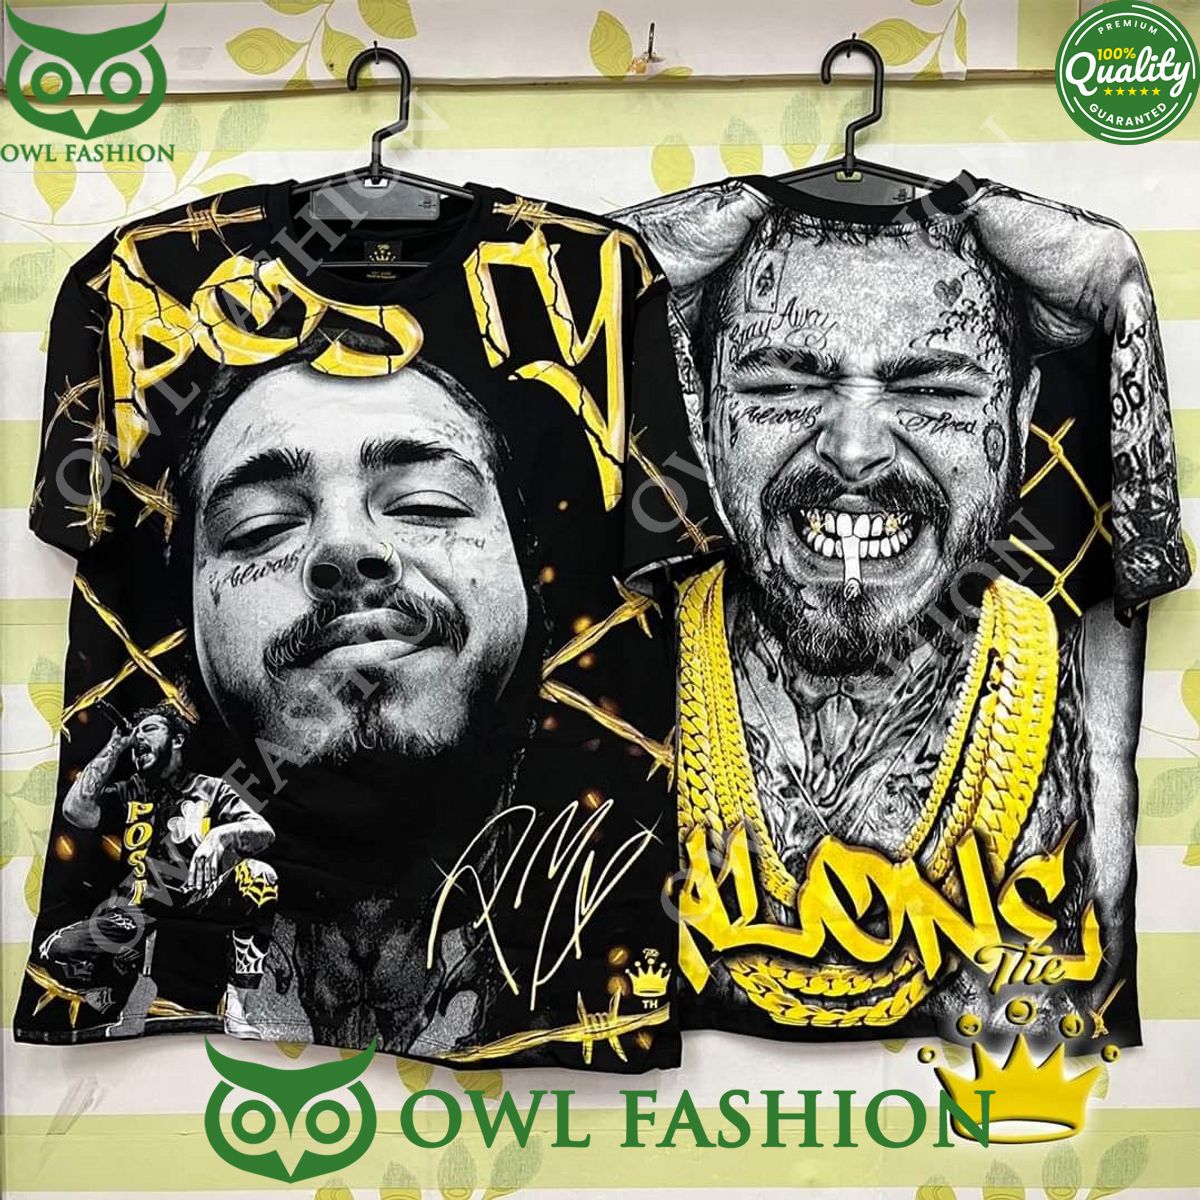 Posty Malone Gold Crown Printed t shirt Natural and awesome